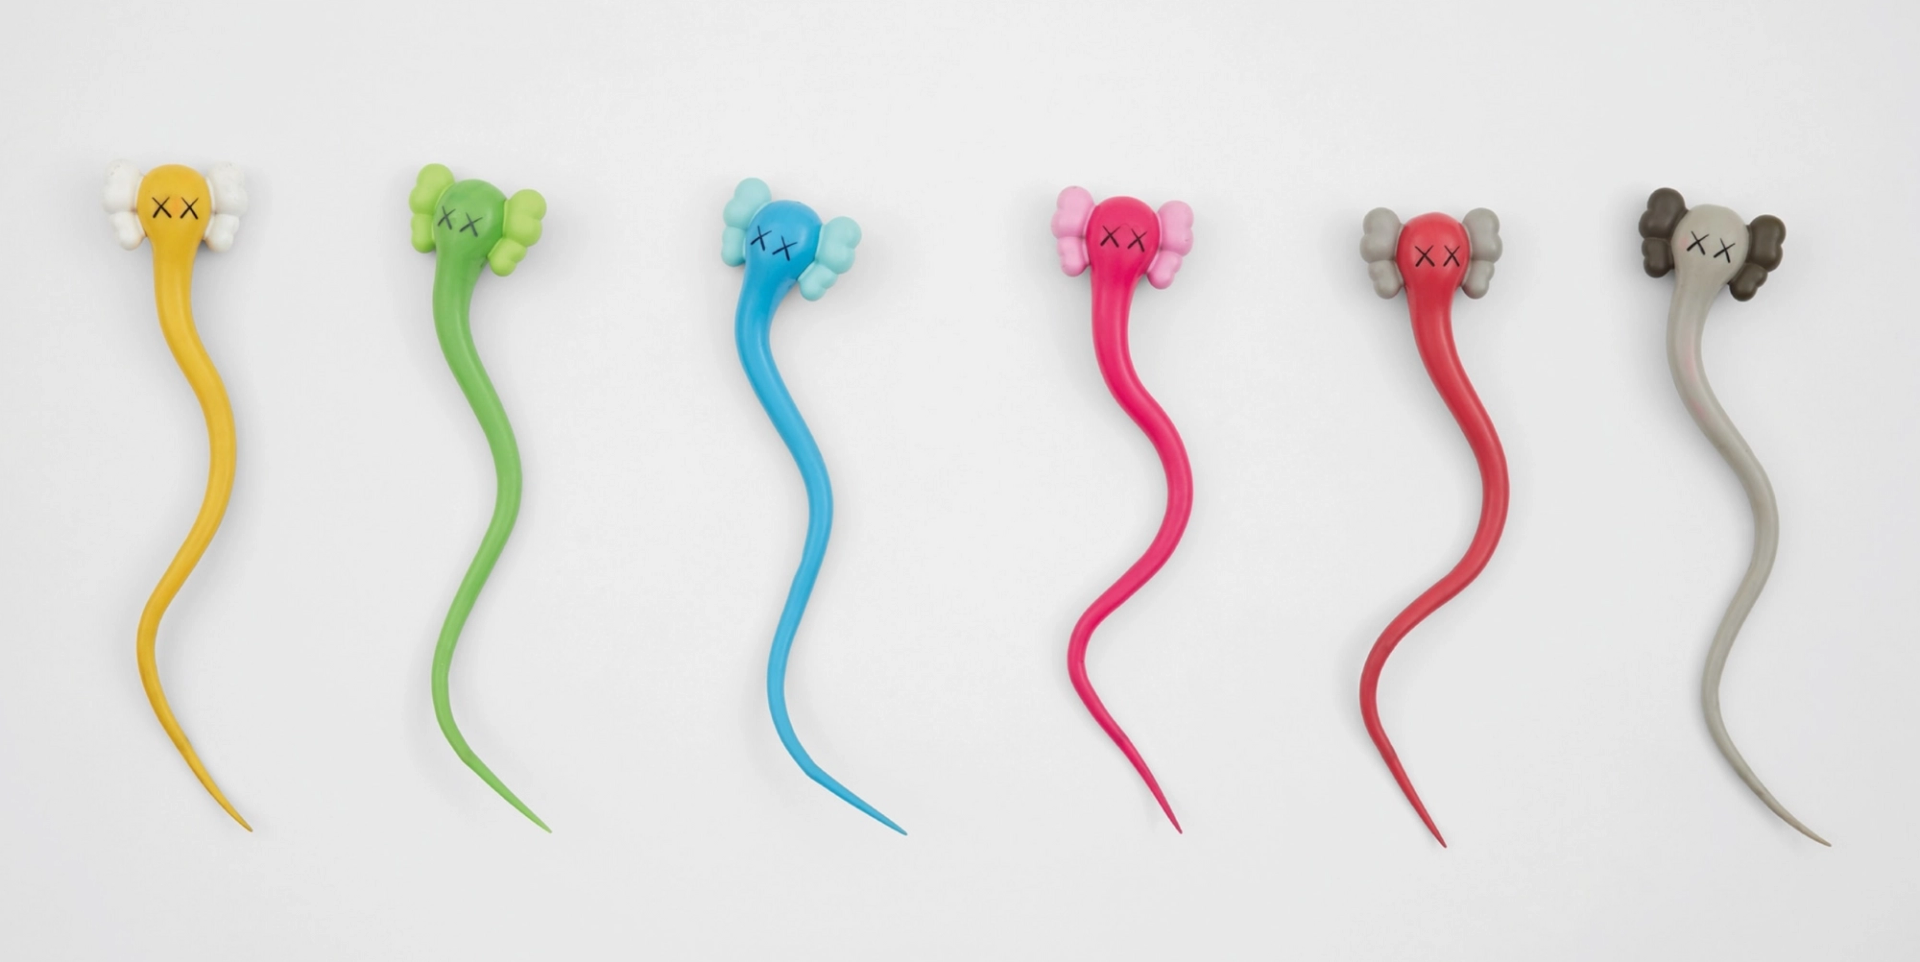 Bendy Six Colours (yellow, green, blue, pink, red, grey) by KAWS